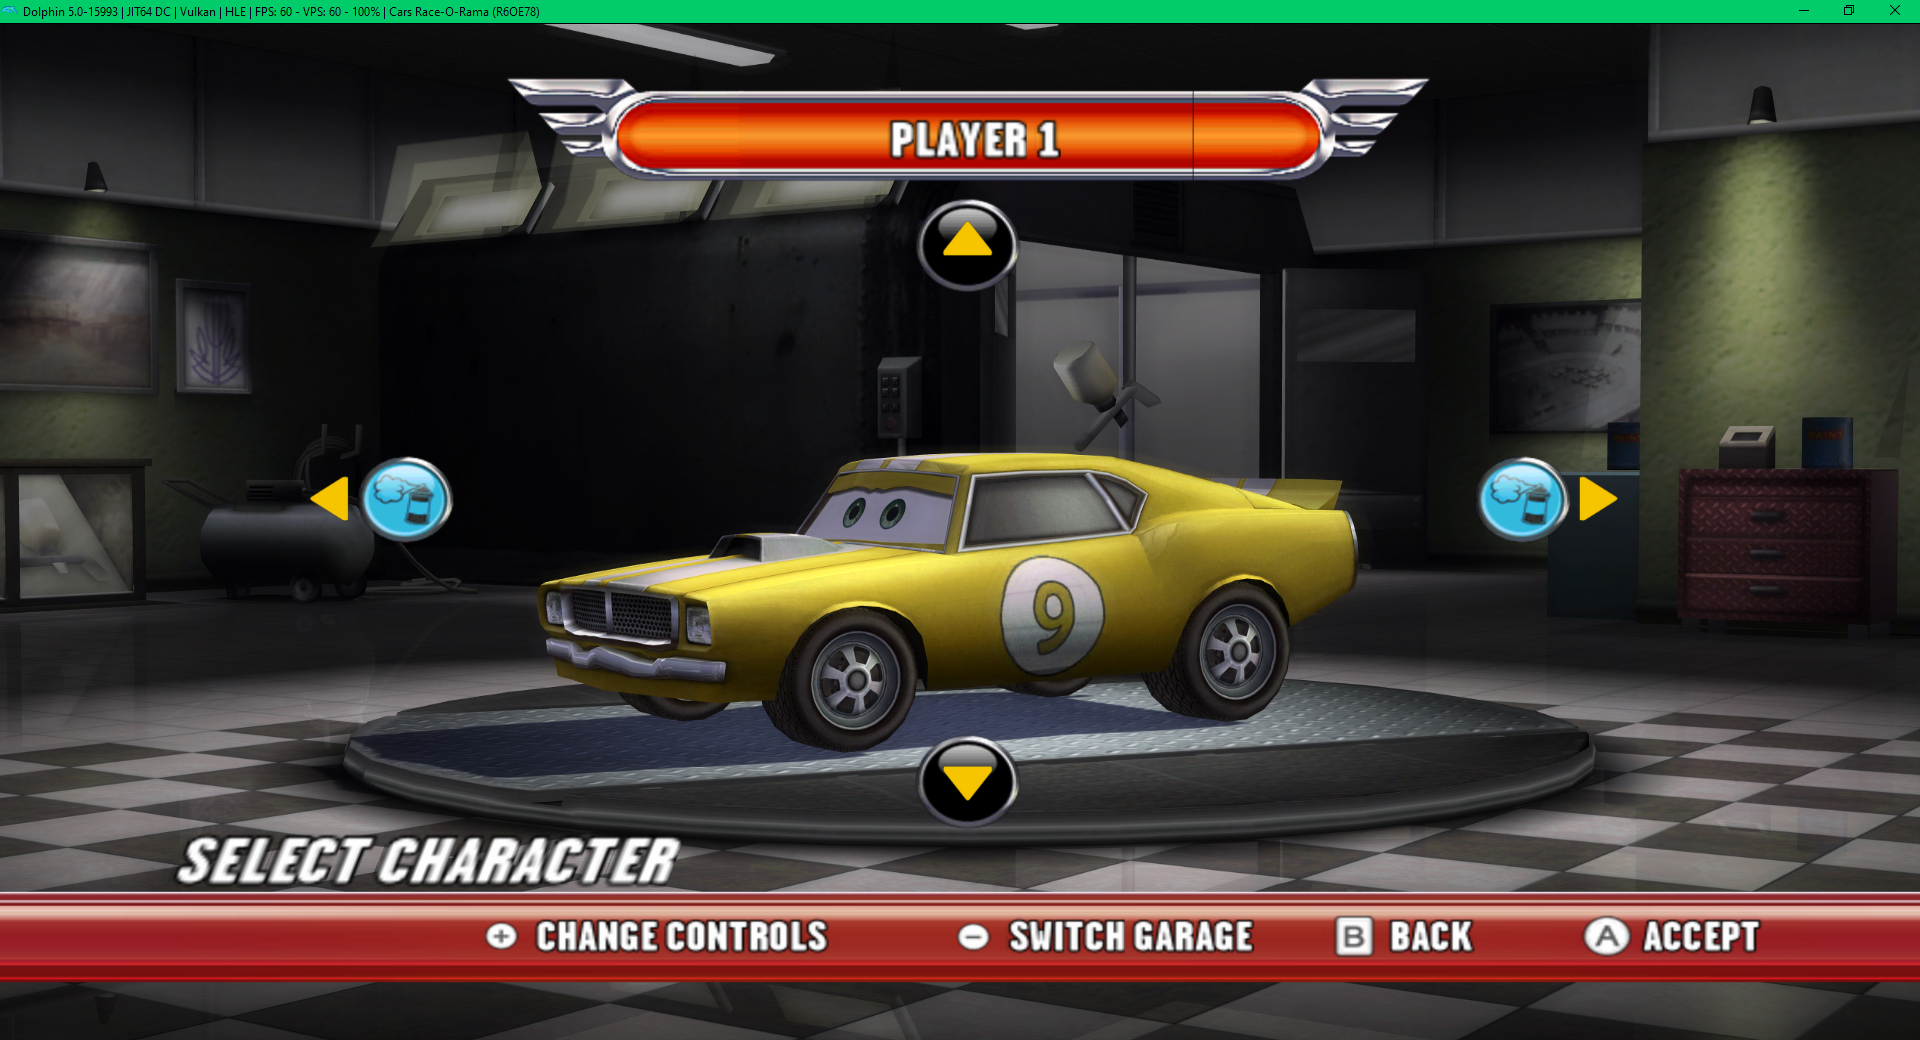 Cars: Race-O-Rama - Queens Gang Addon Pack, Cars Video Game Modding Wiki